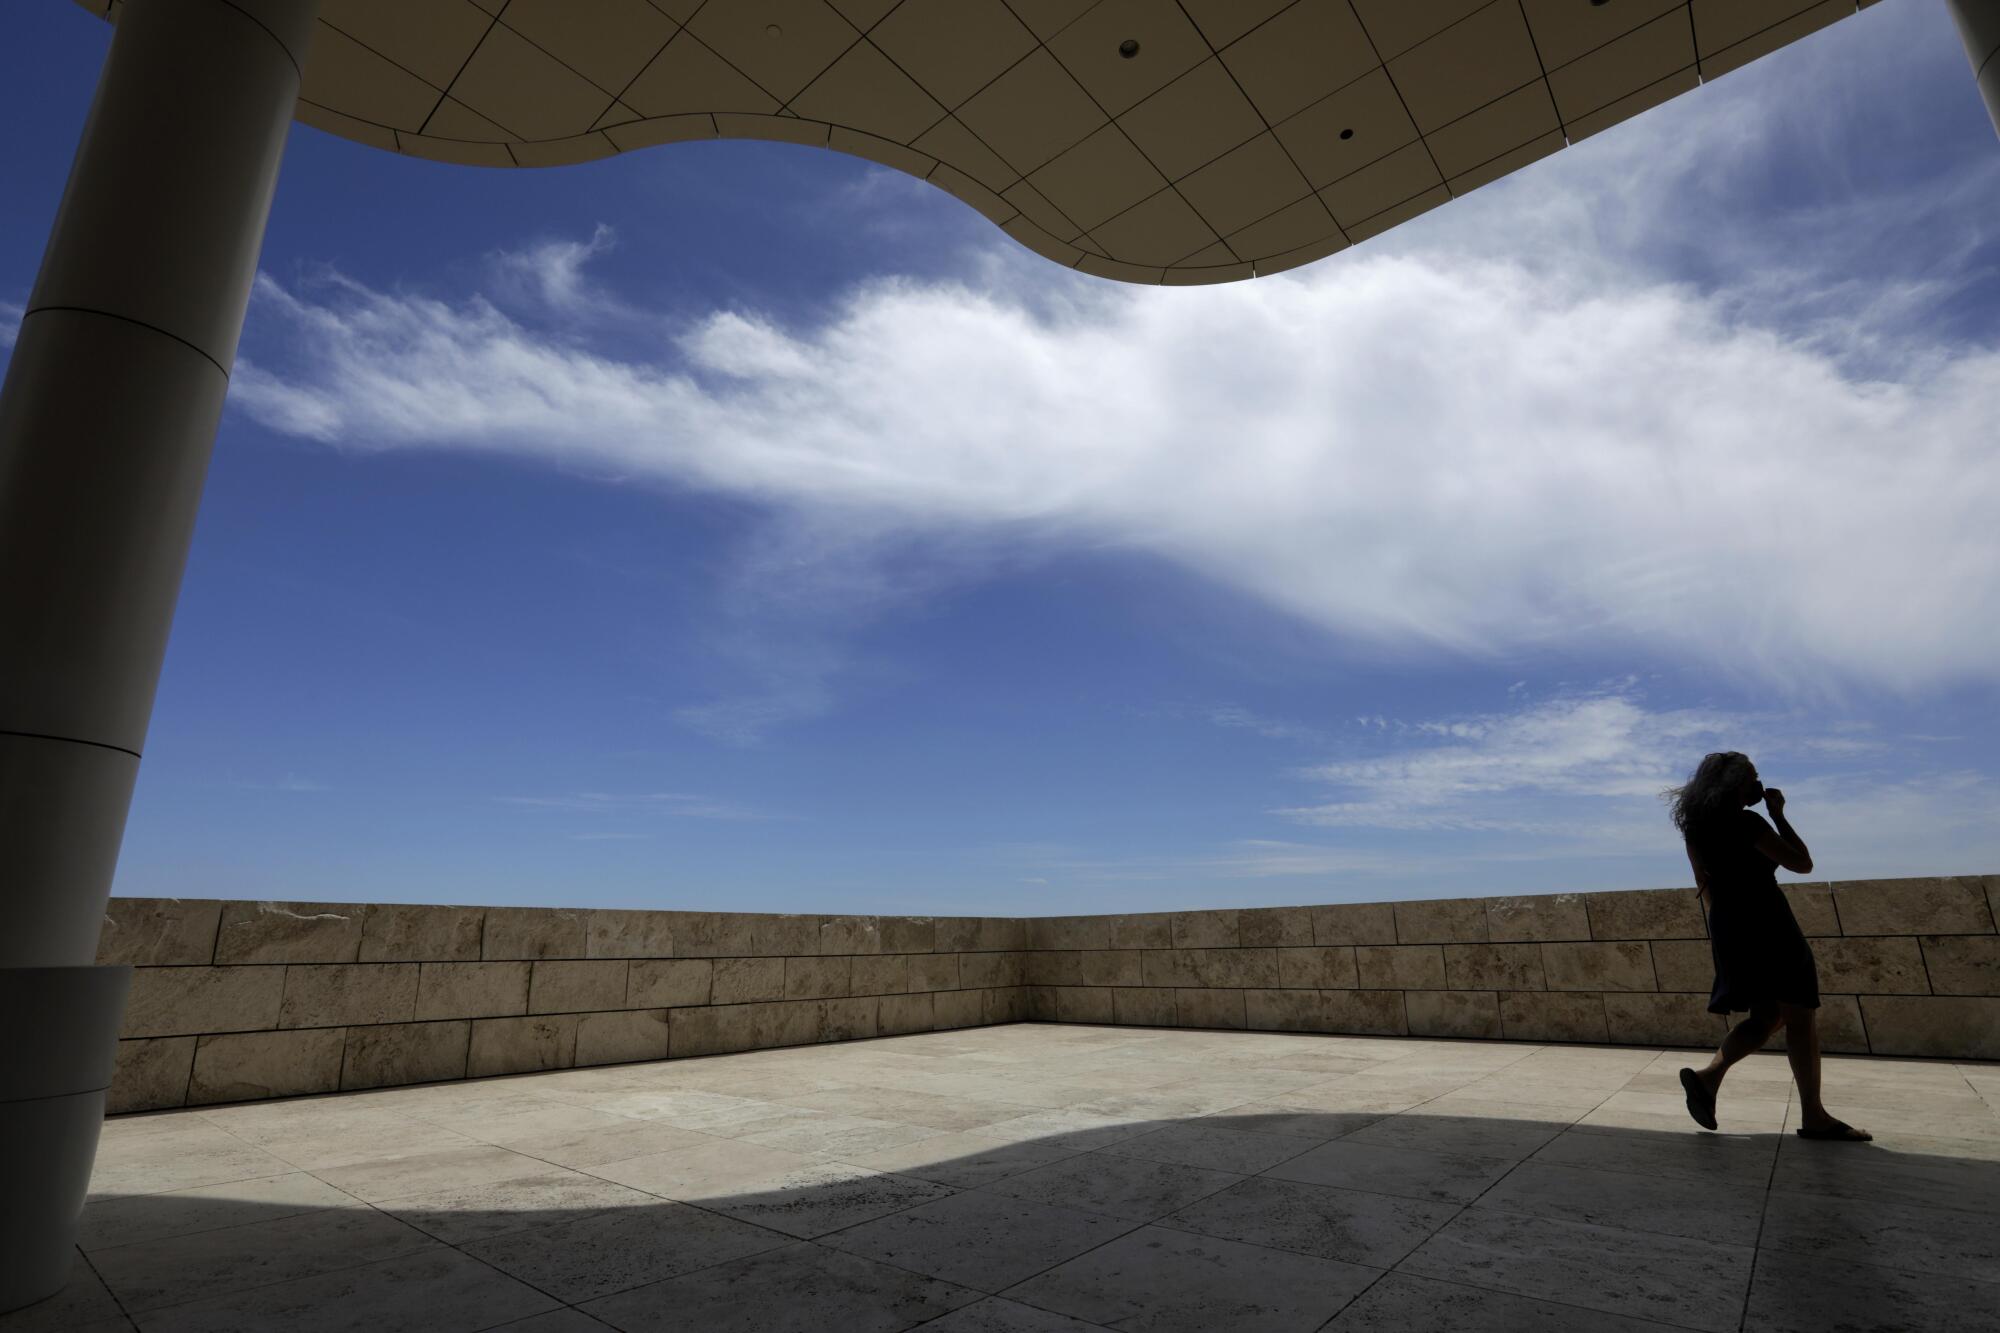 A visitor walks on a paved terrace at the Getty Center